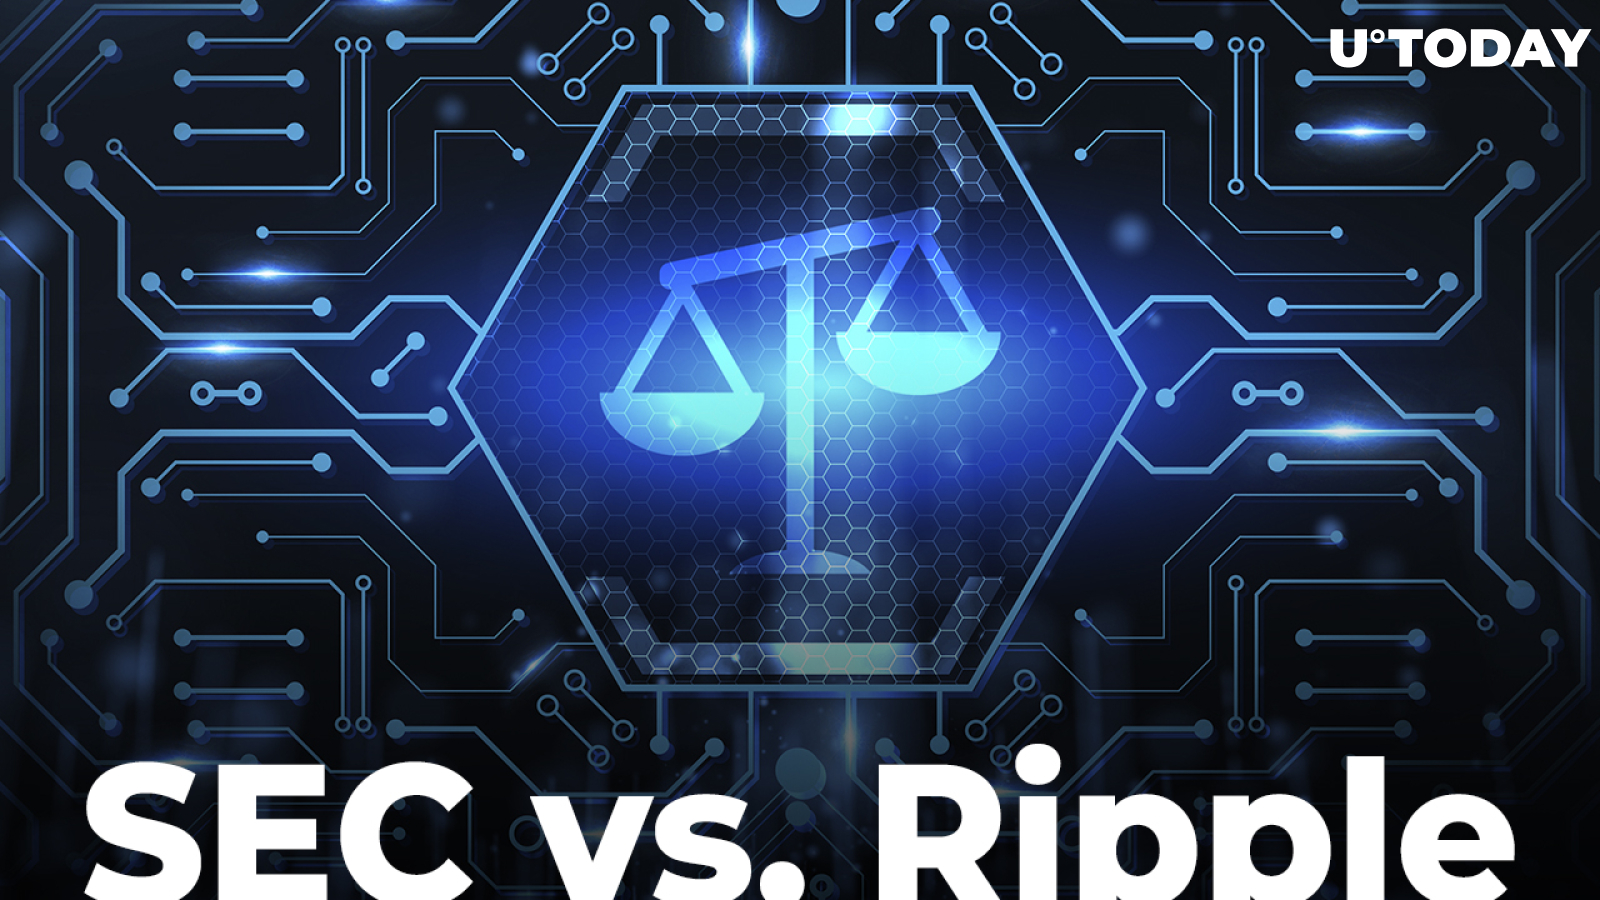 SEC v. Ripple: Regulator Wants to Redact Some Notes Taken During Meeting with Third Parties